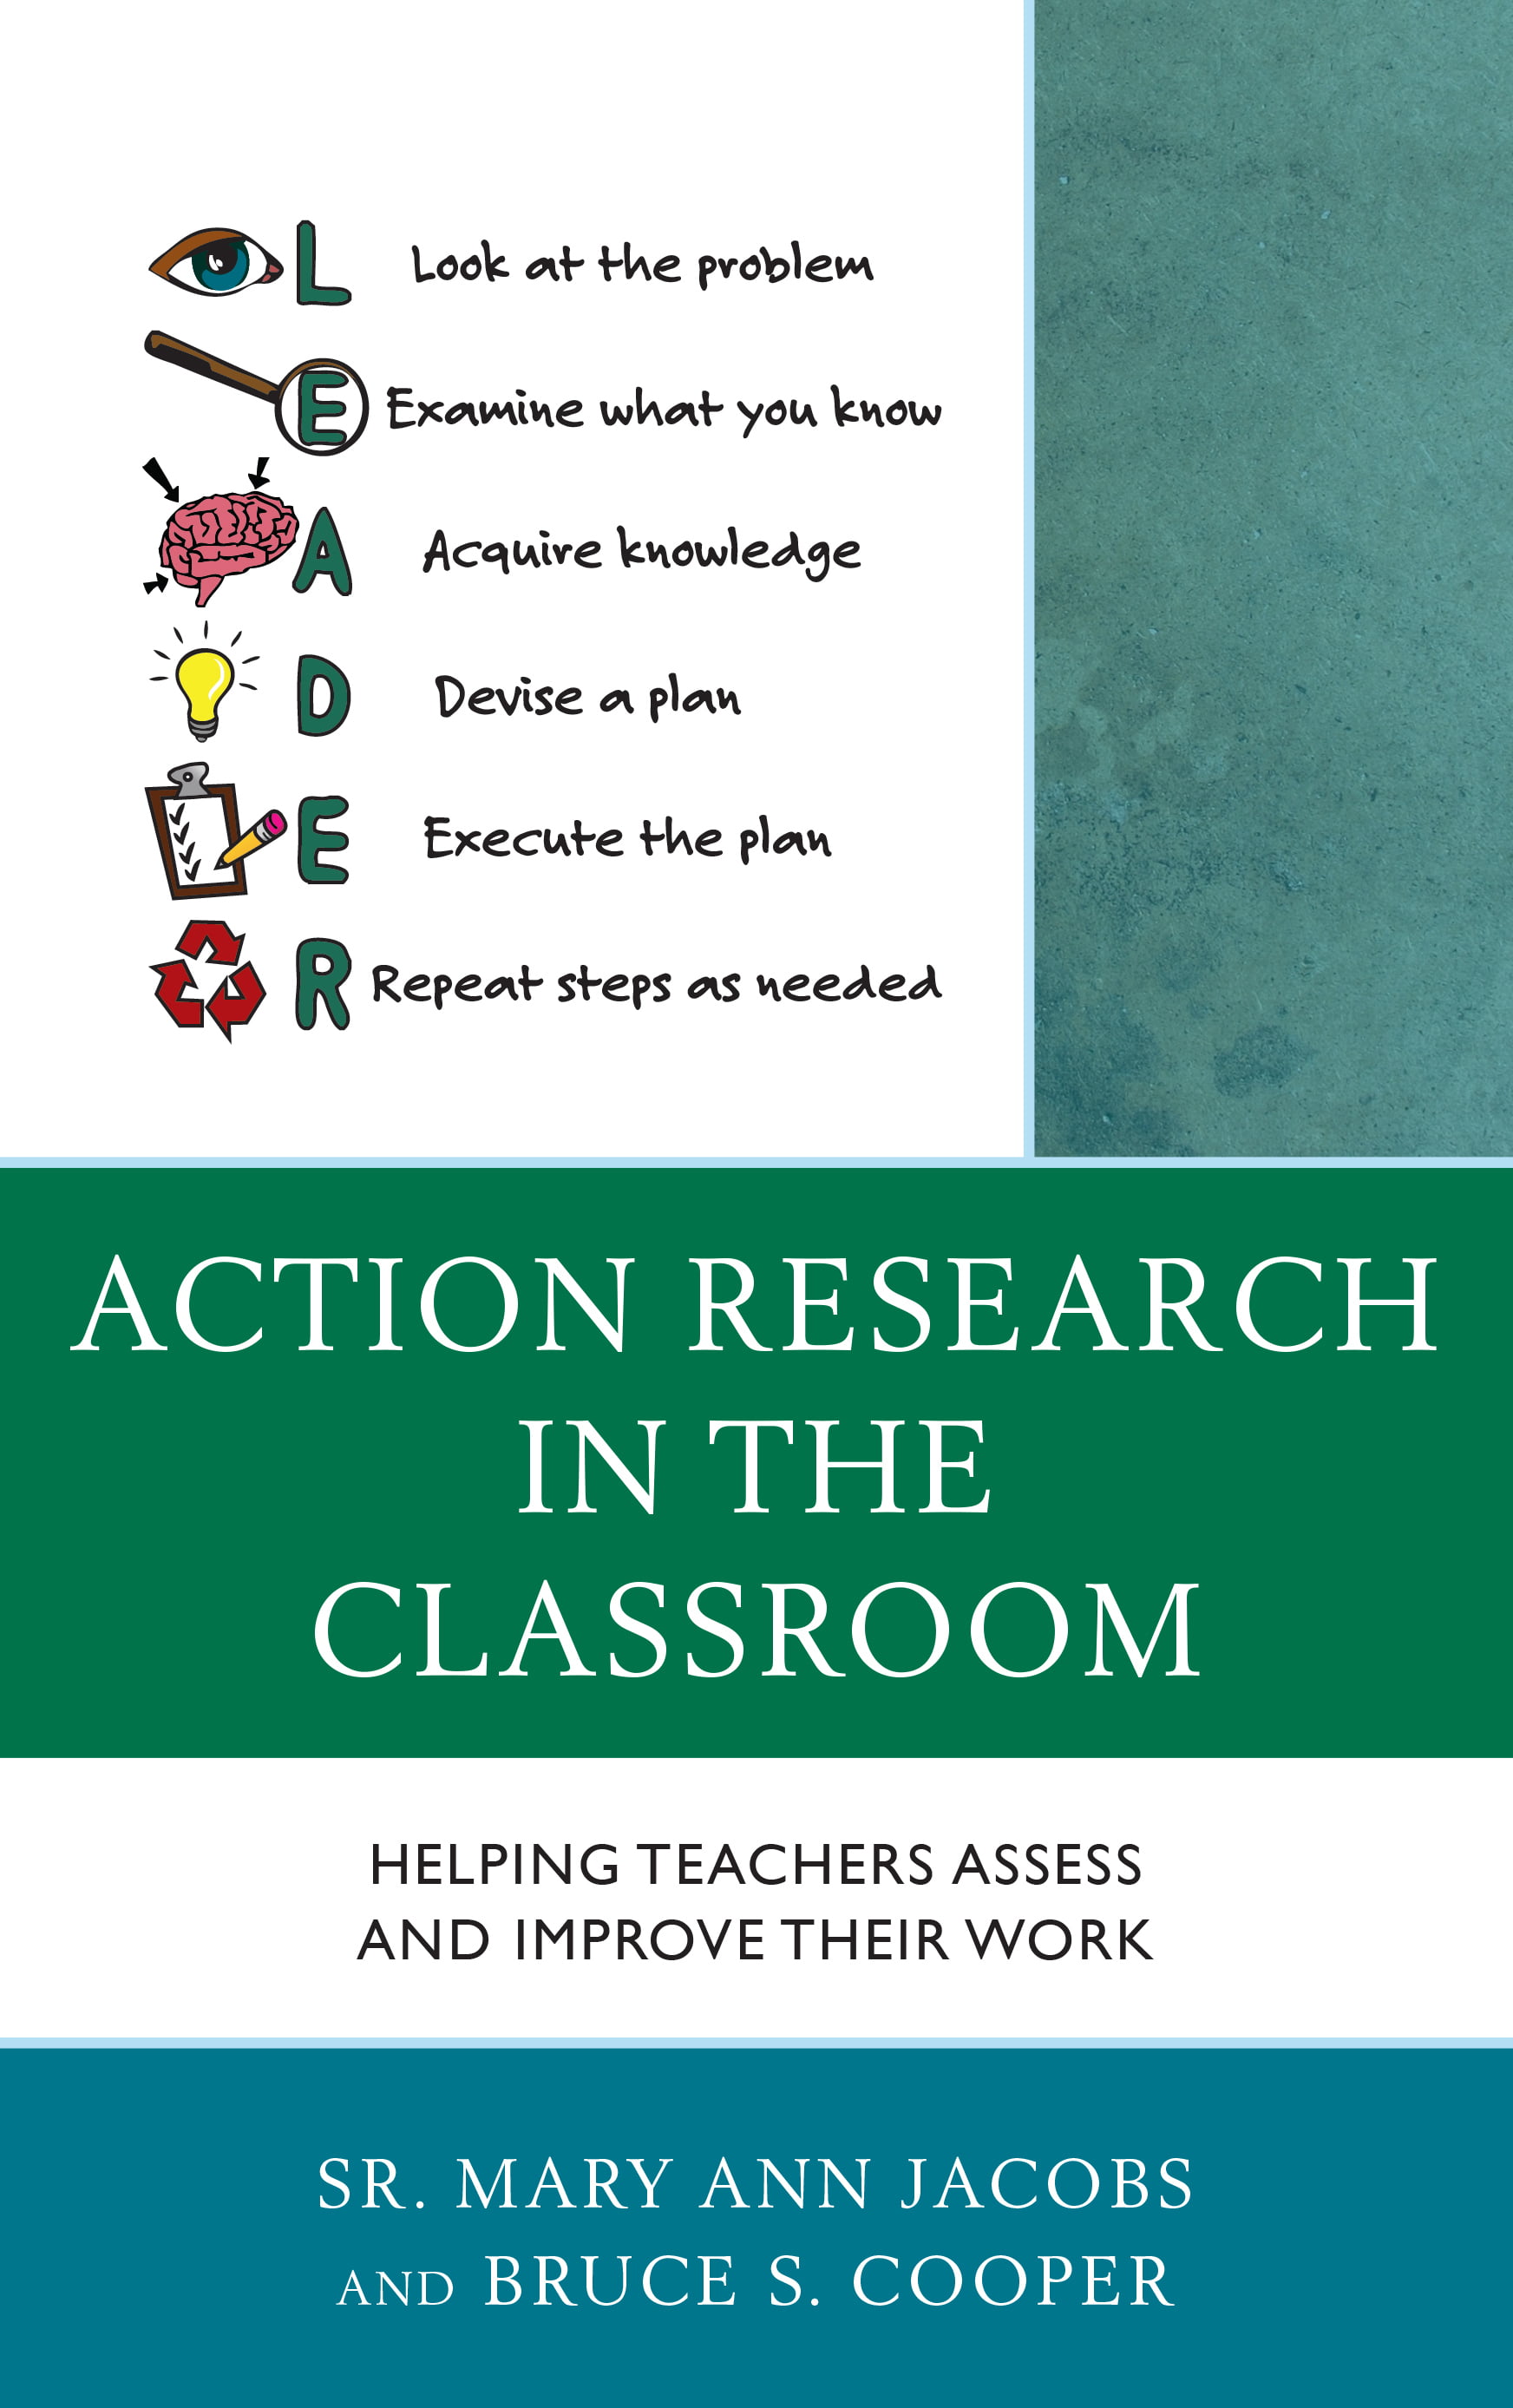 thesis classroom action research